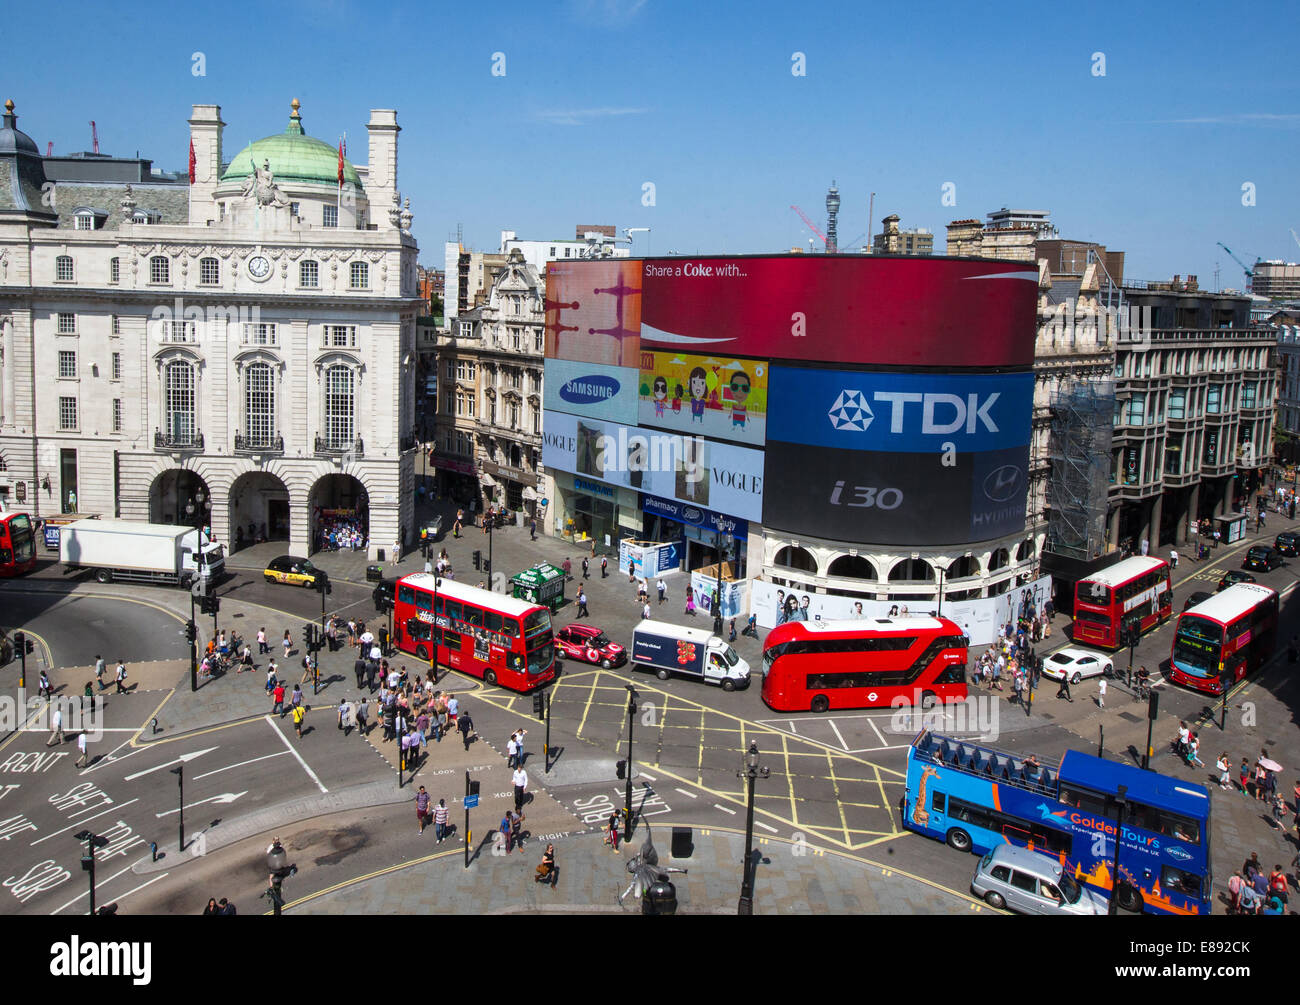 Piccadilly Circus built in 1819 to connect Regent Street to Piccadilly.It has a statue to Eros the Greek God of Love Stock Photo